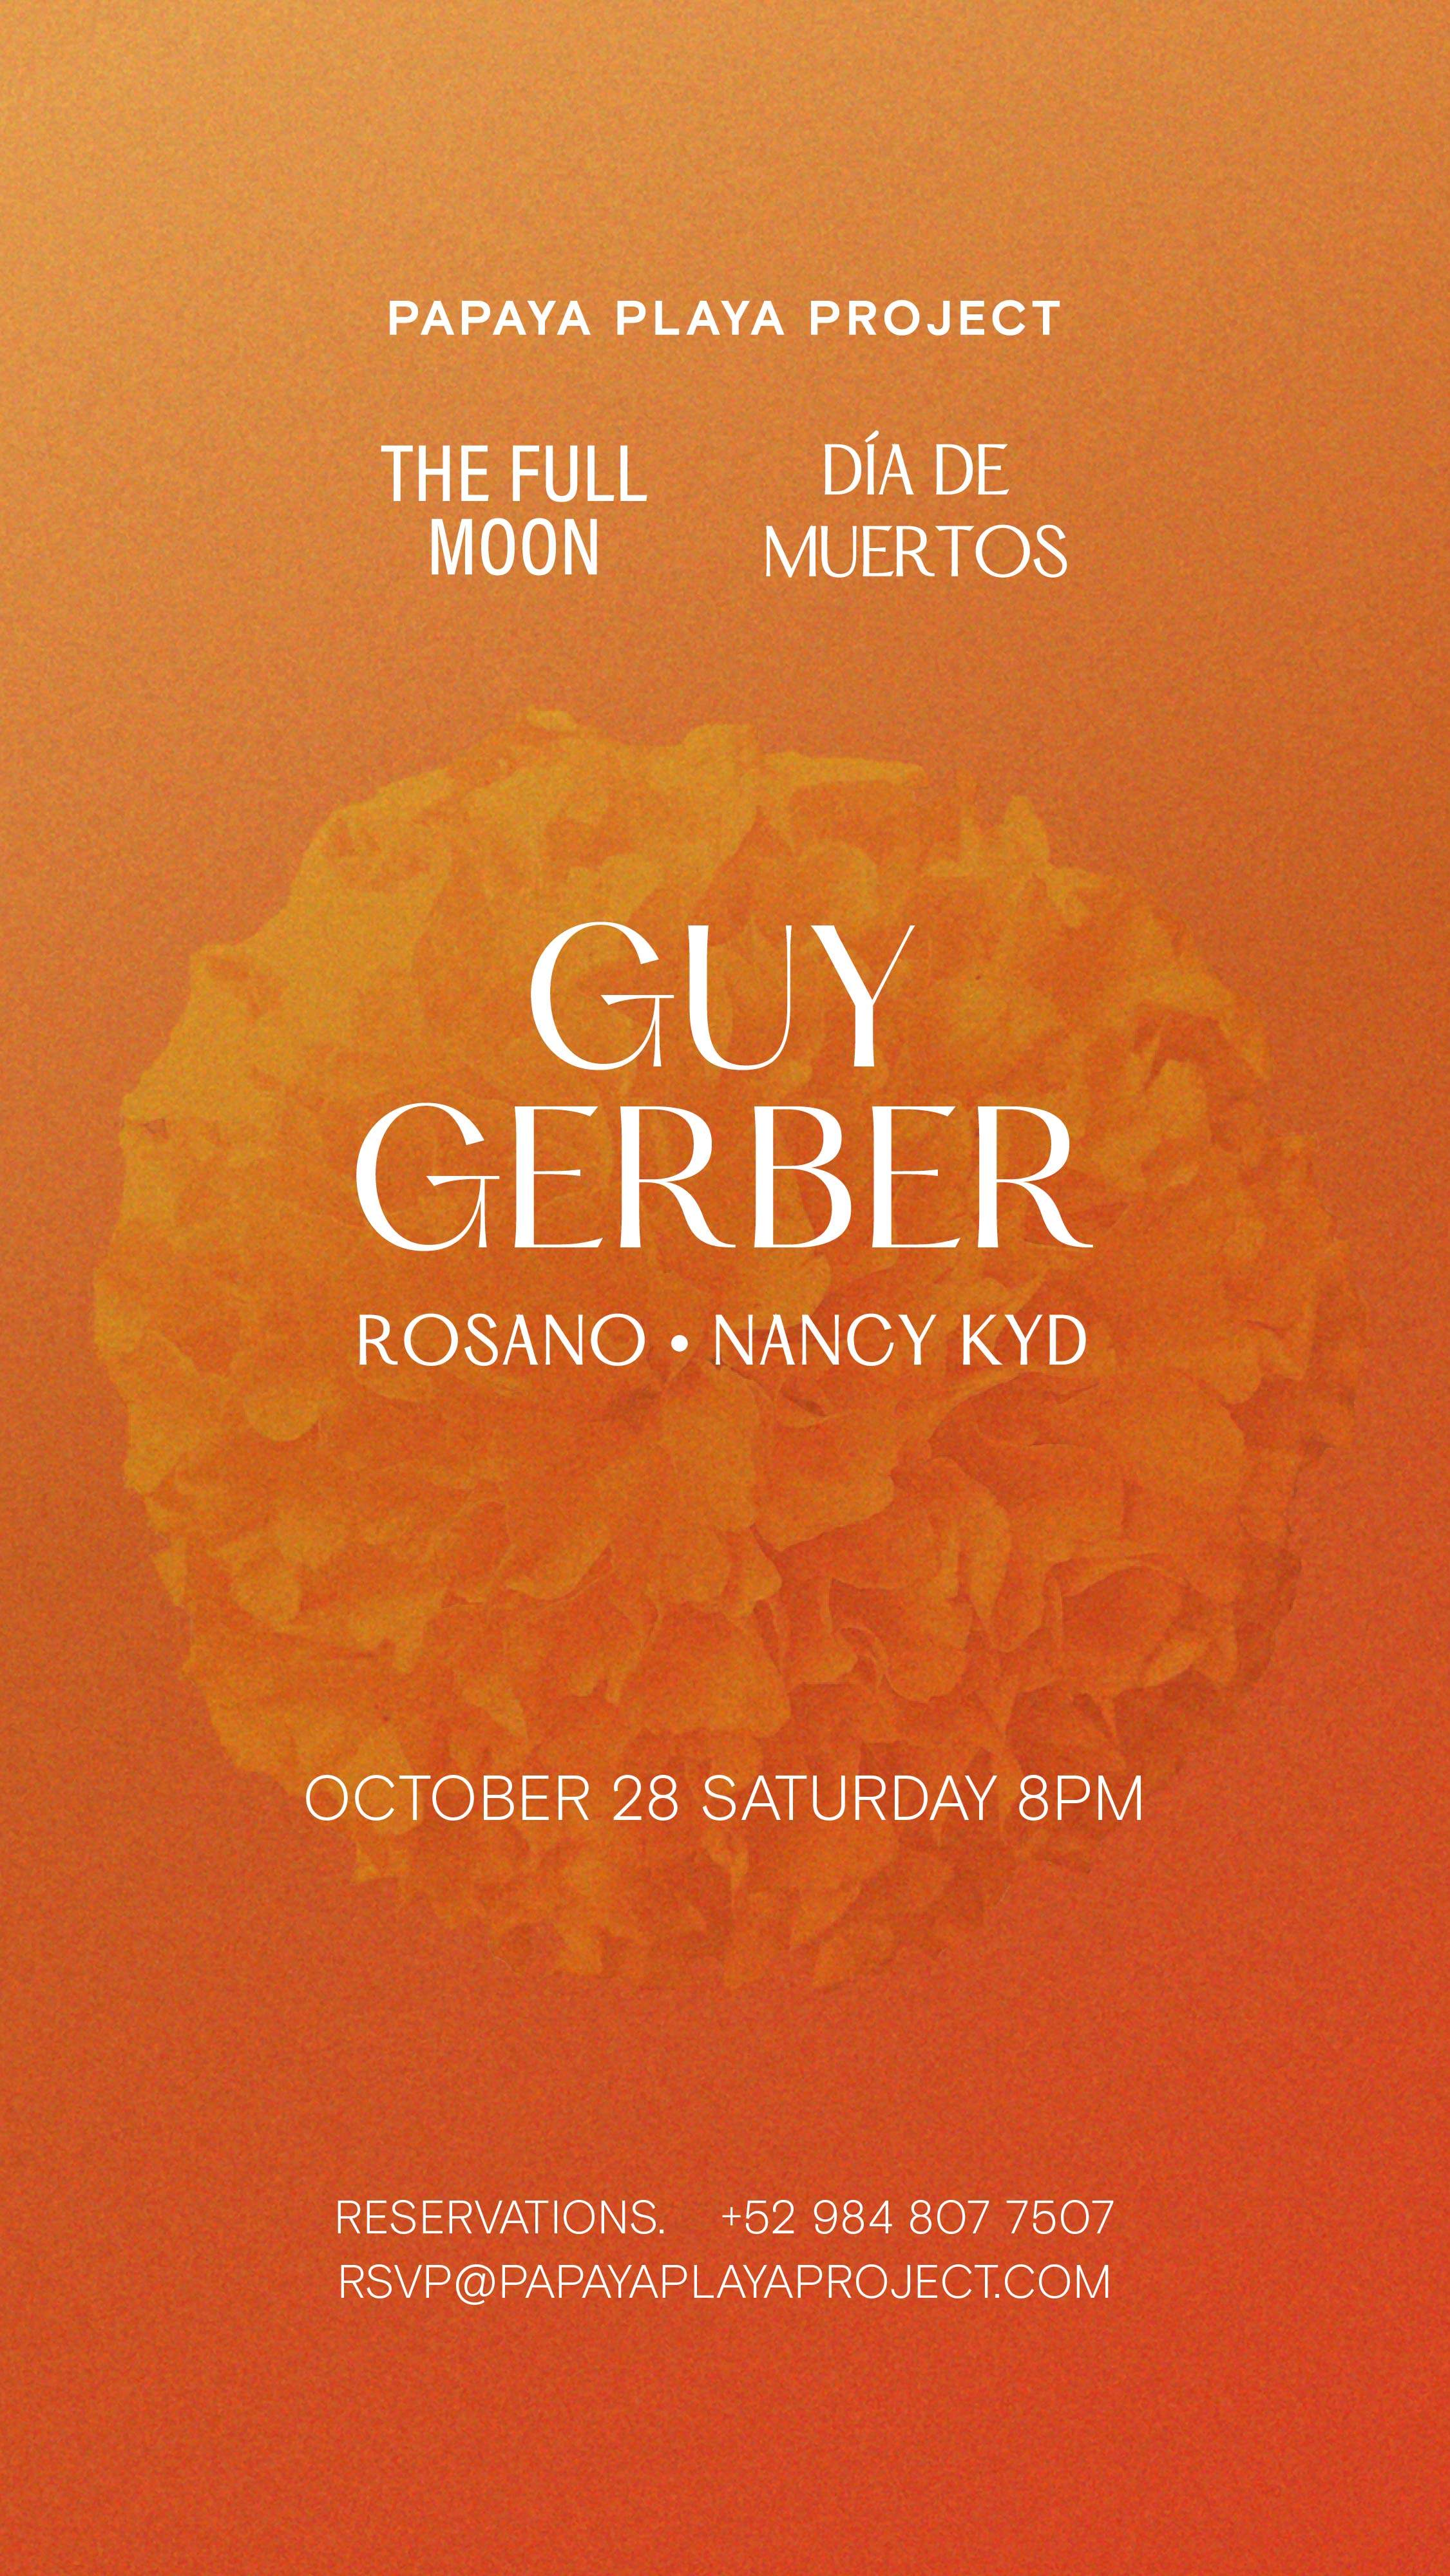 PPP presents The Full Moon with Guy Gerber - Rosano & Nancy Kid - フライヤー表